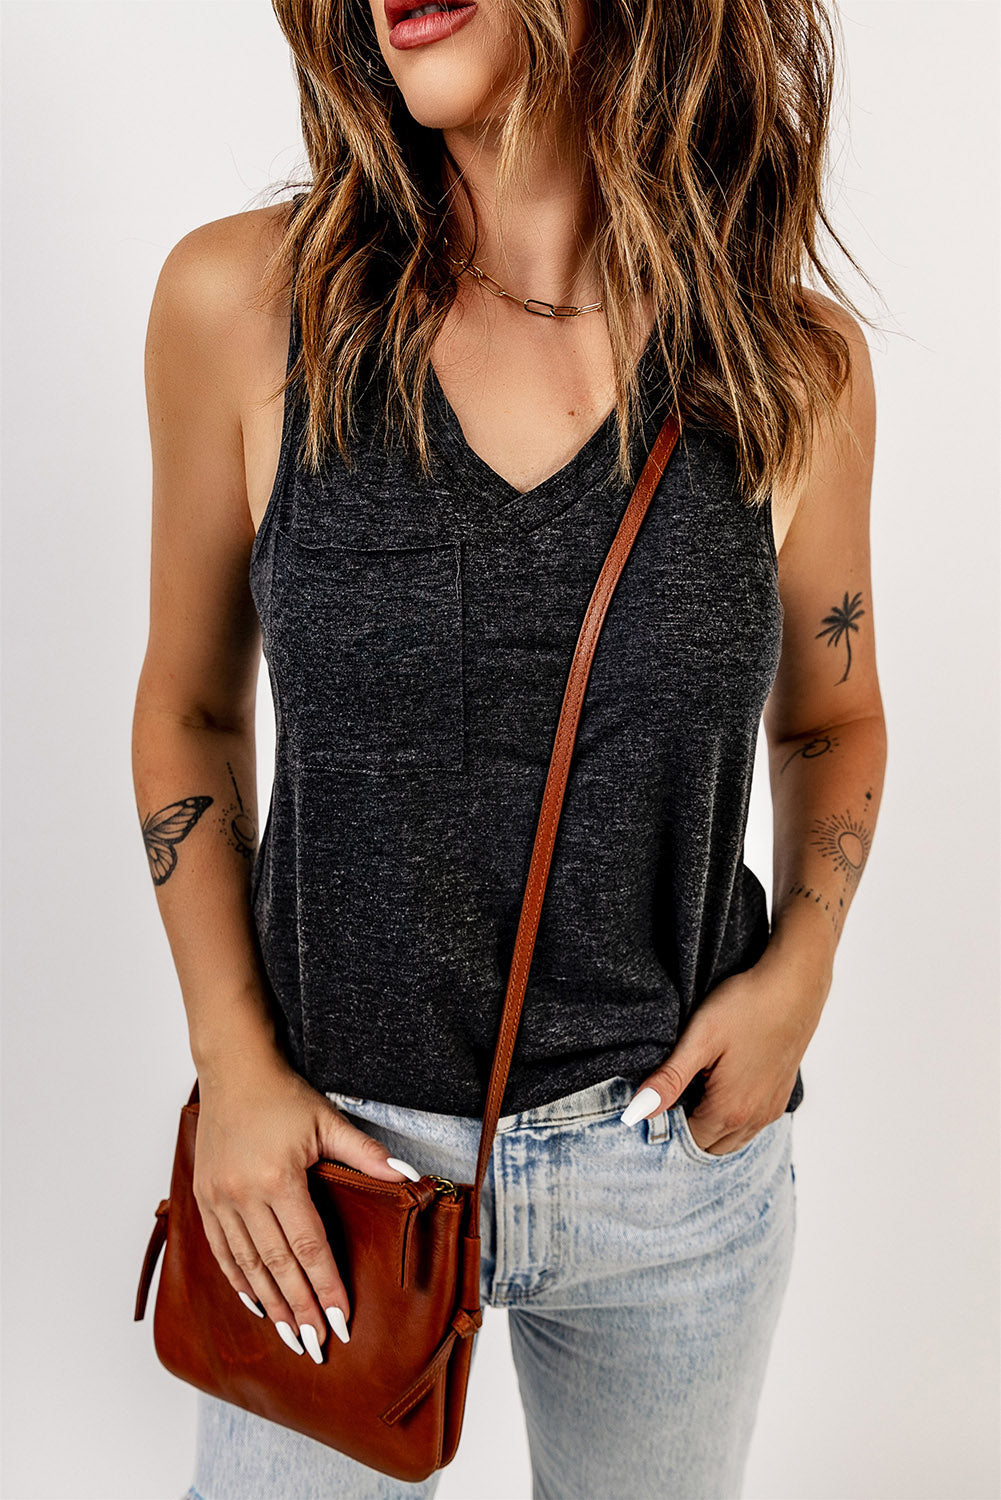 Casual V Neck Racerback Tank Top With Pocket